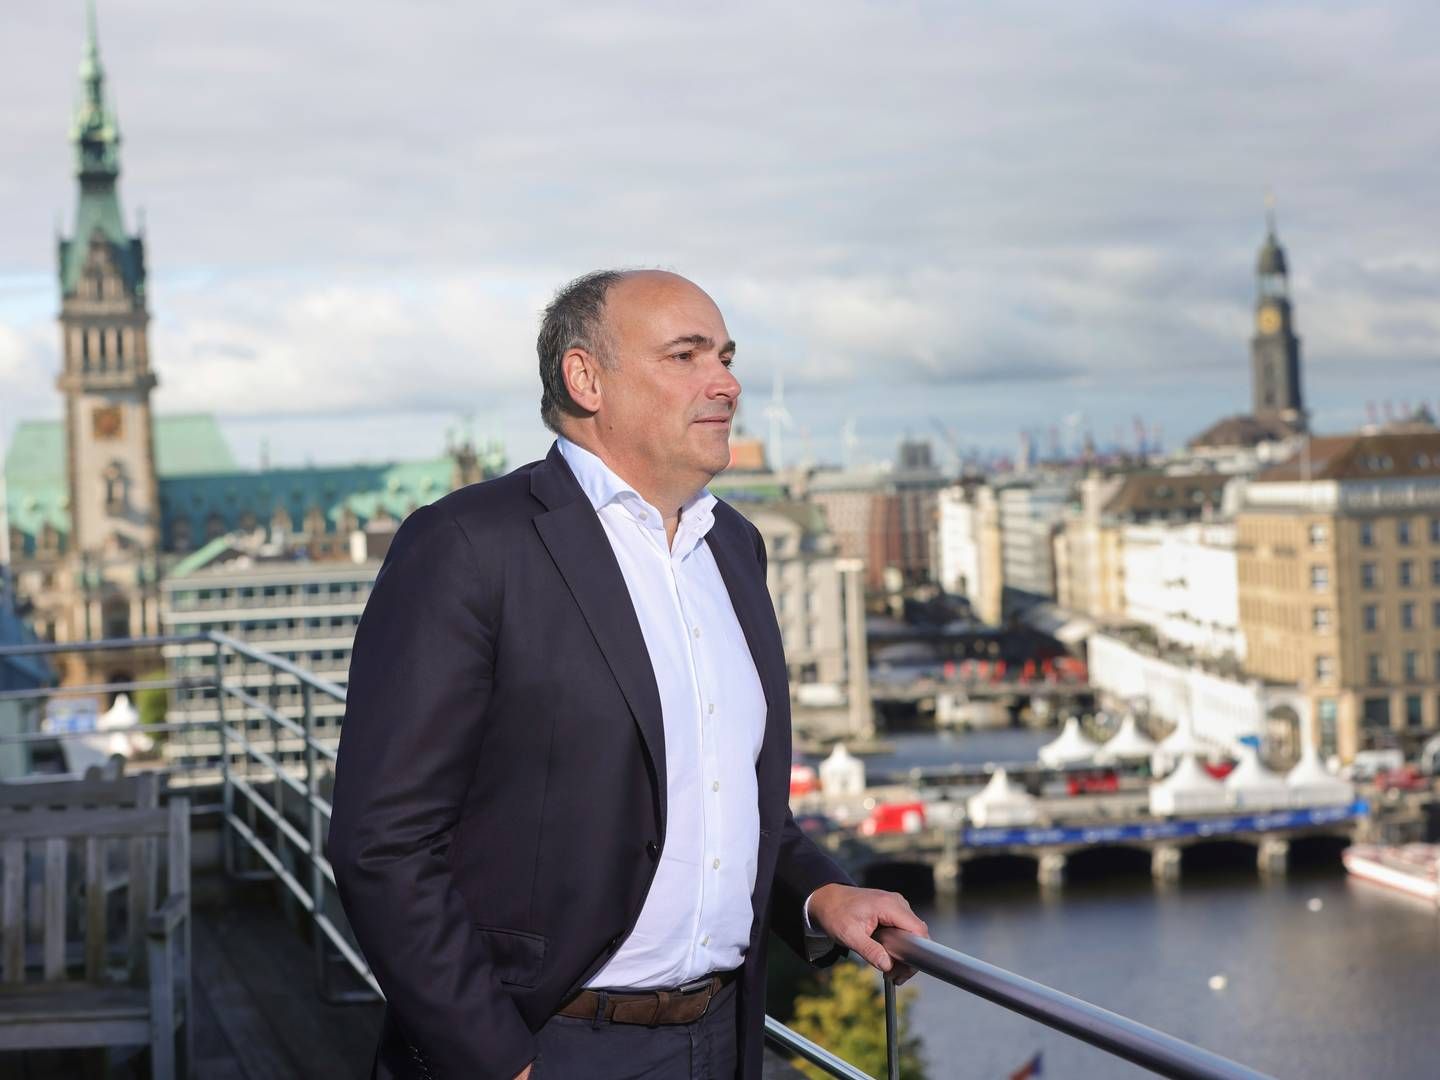 "We have seen some three-digit rates in some of the large east-west trades a couple of months back," says CEO of Hapag-Lloyd Rolf Habben Jansen on the loss-generating spot rates on the box market.